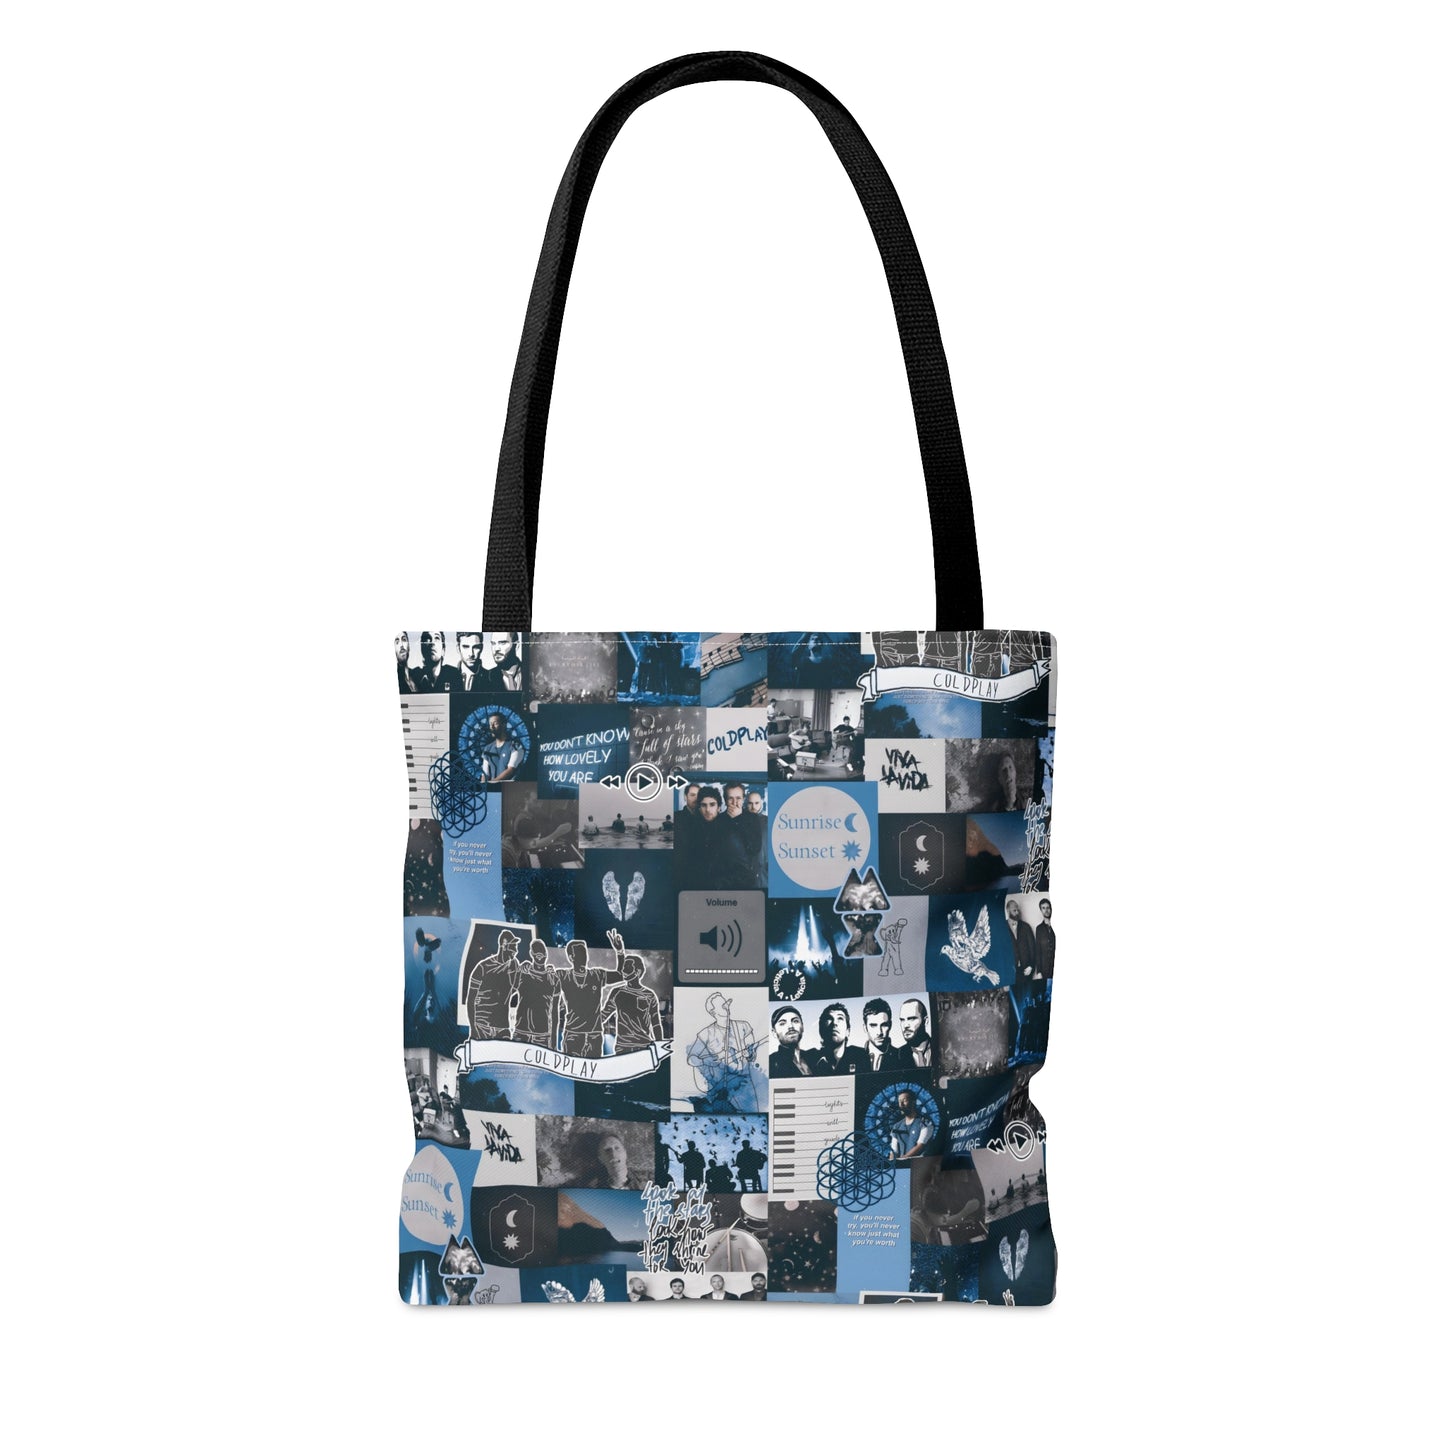 Coldplay Sunrise Sunset Collage Tote Bag